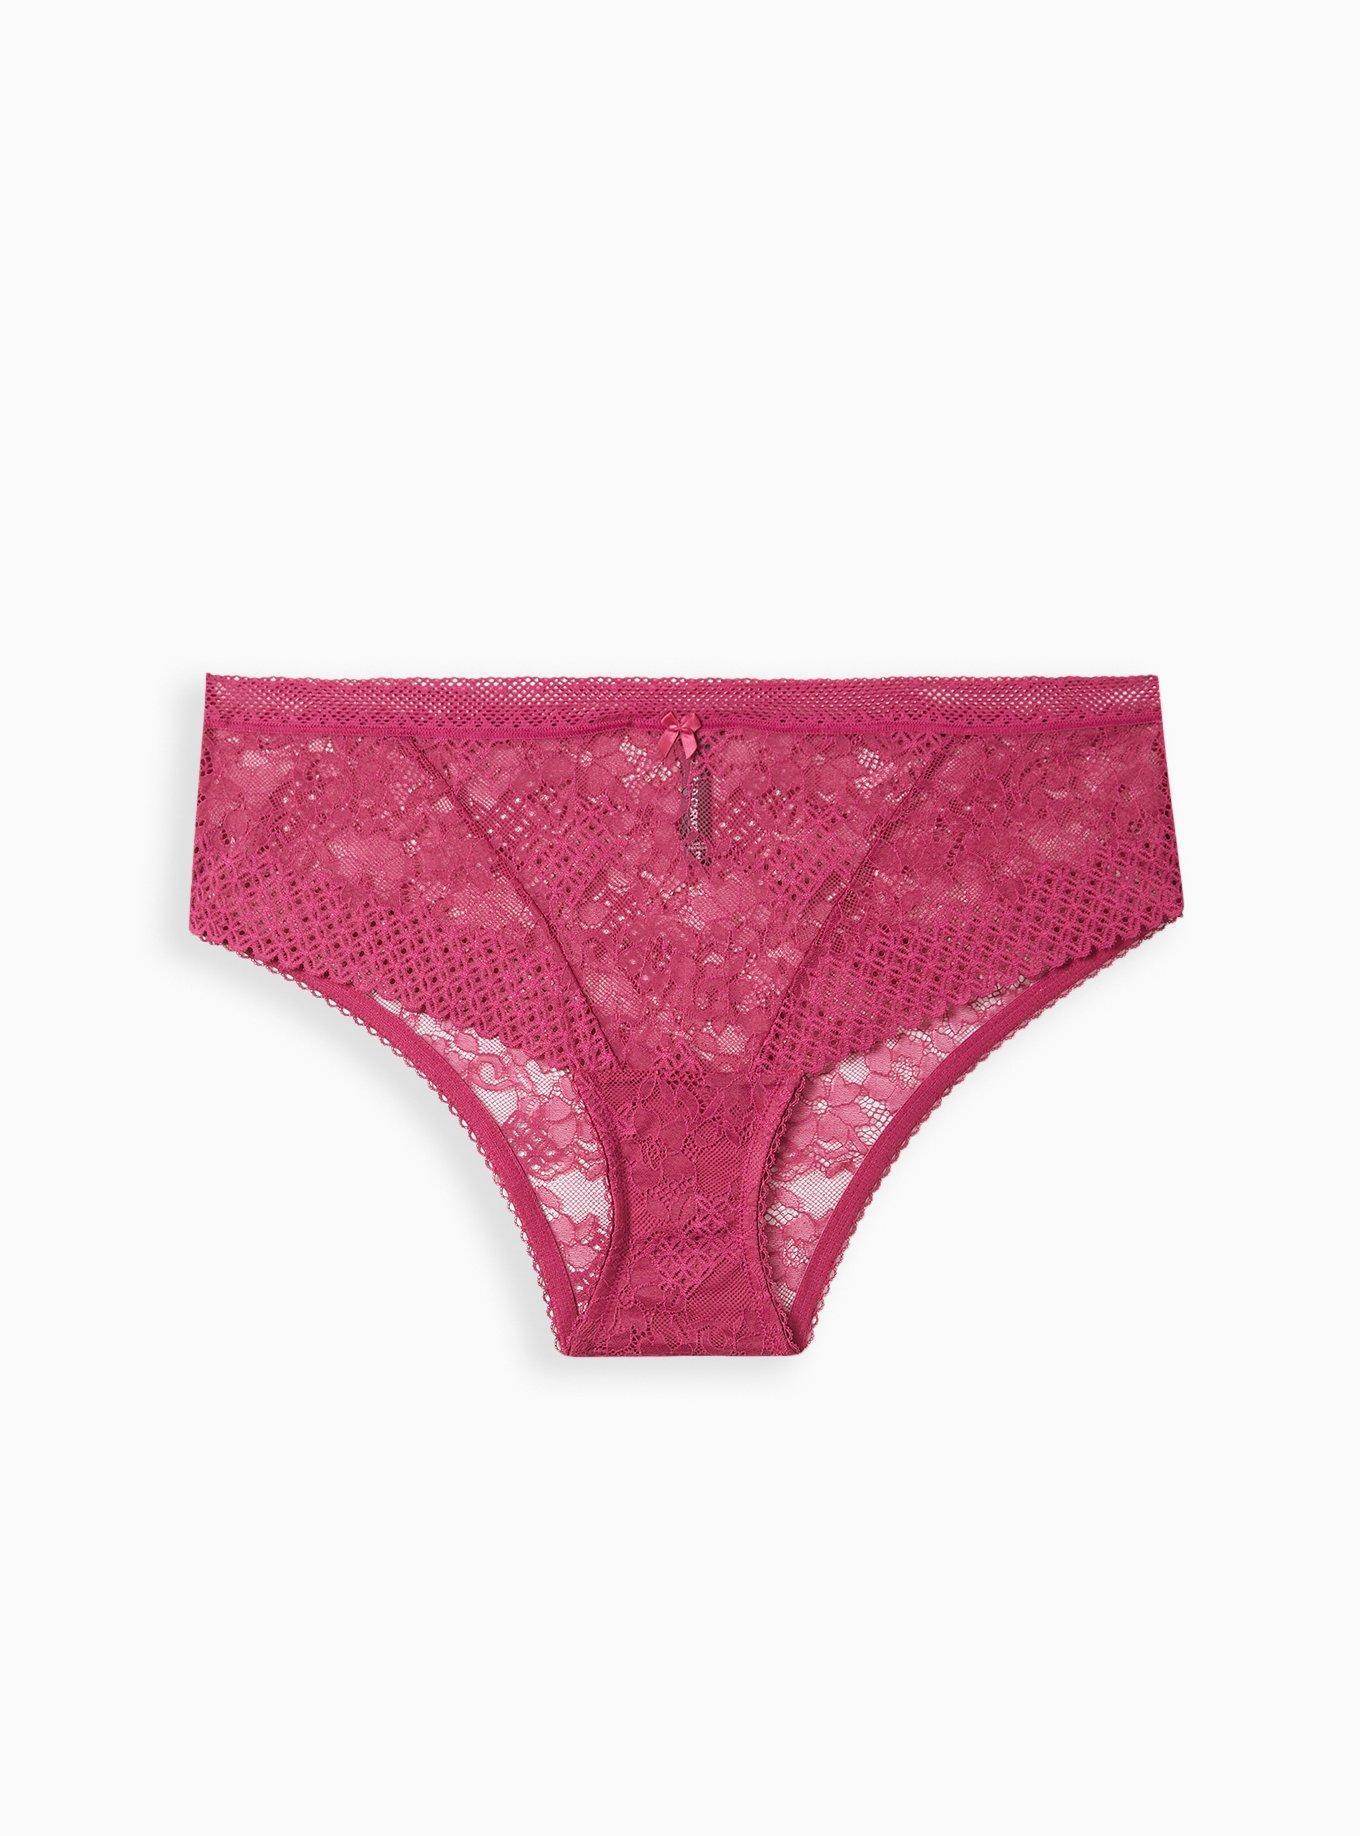 Plus Size - Hipster Panty - Lace Fuchsia - Torrid